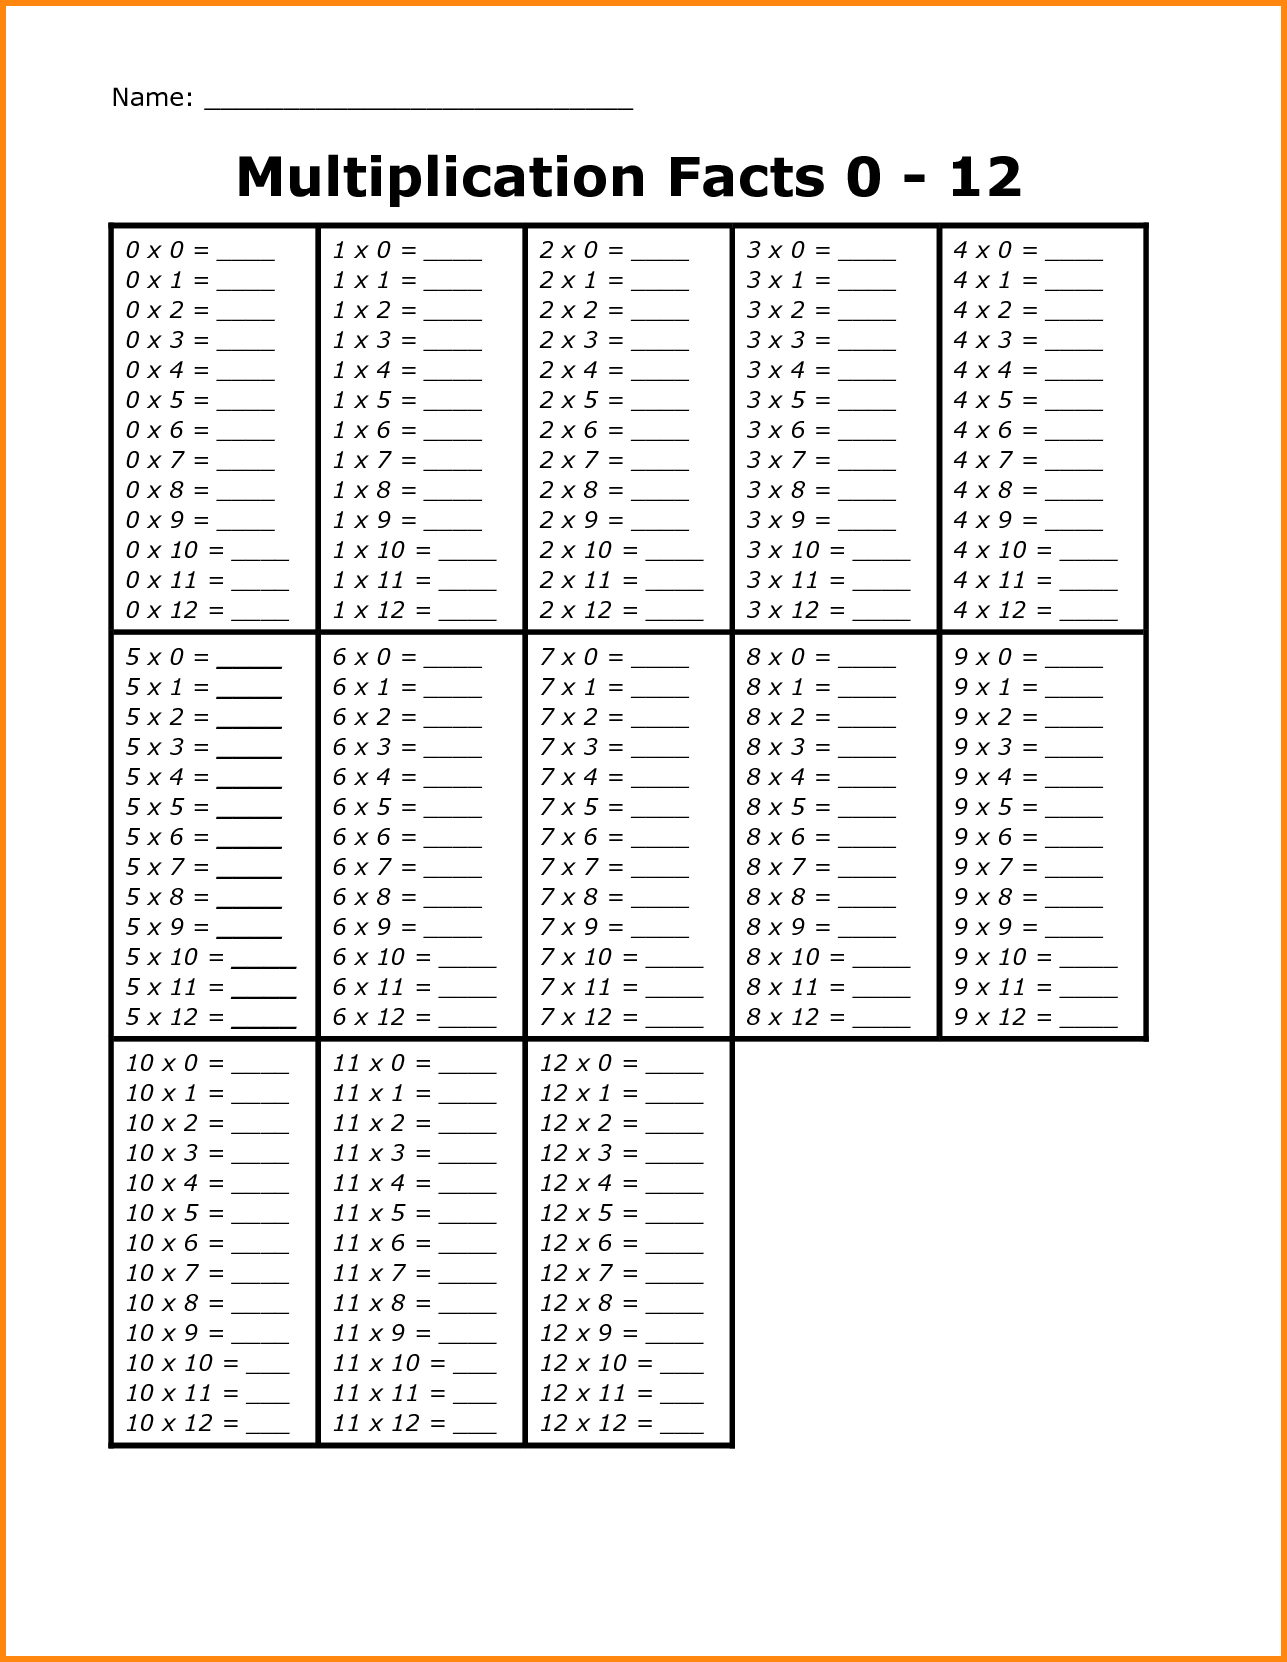 Multiplication Tables 1 12 Printable Worksheets – Worksheet Template - Free Printable Blank Multiplication Table 1 12